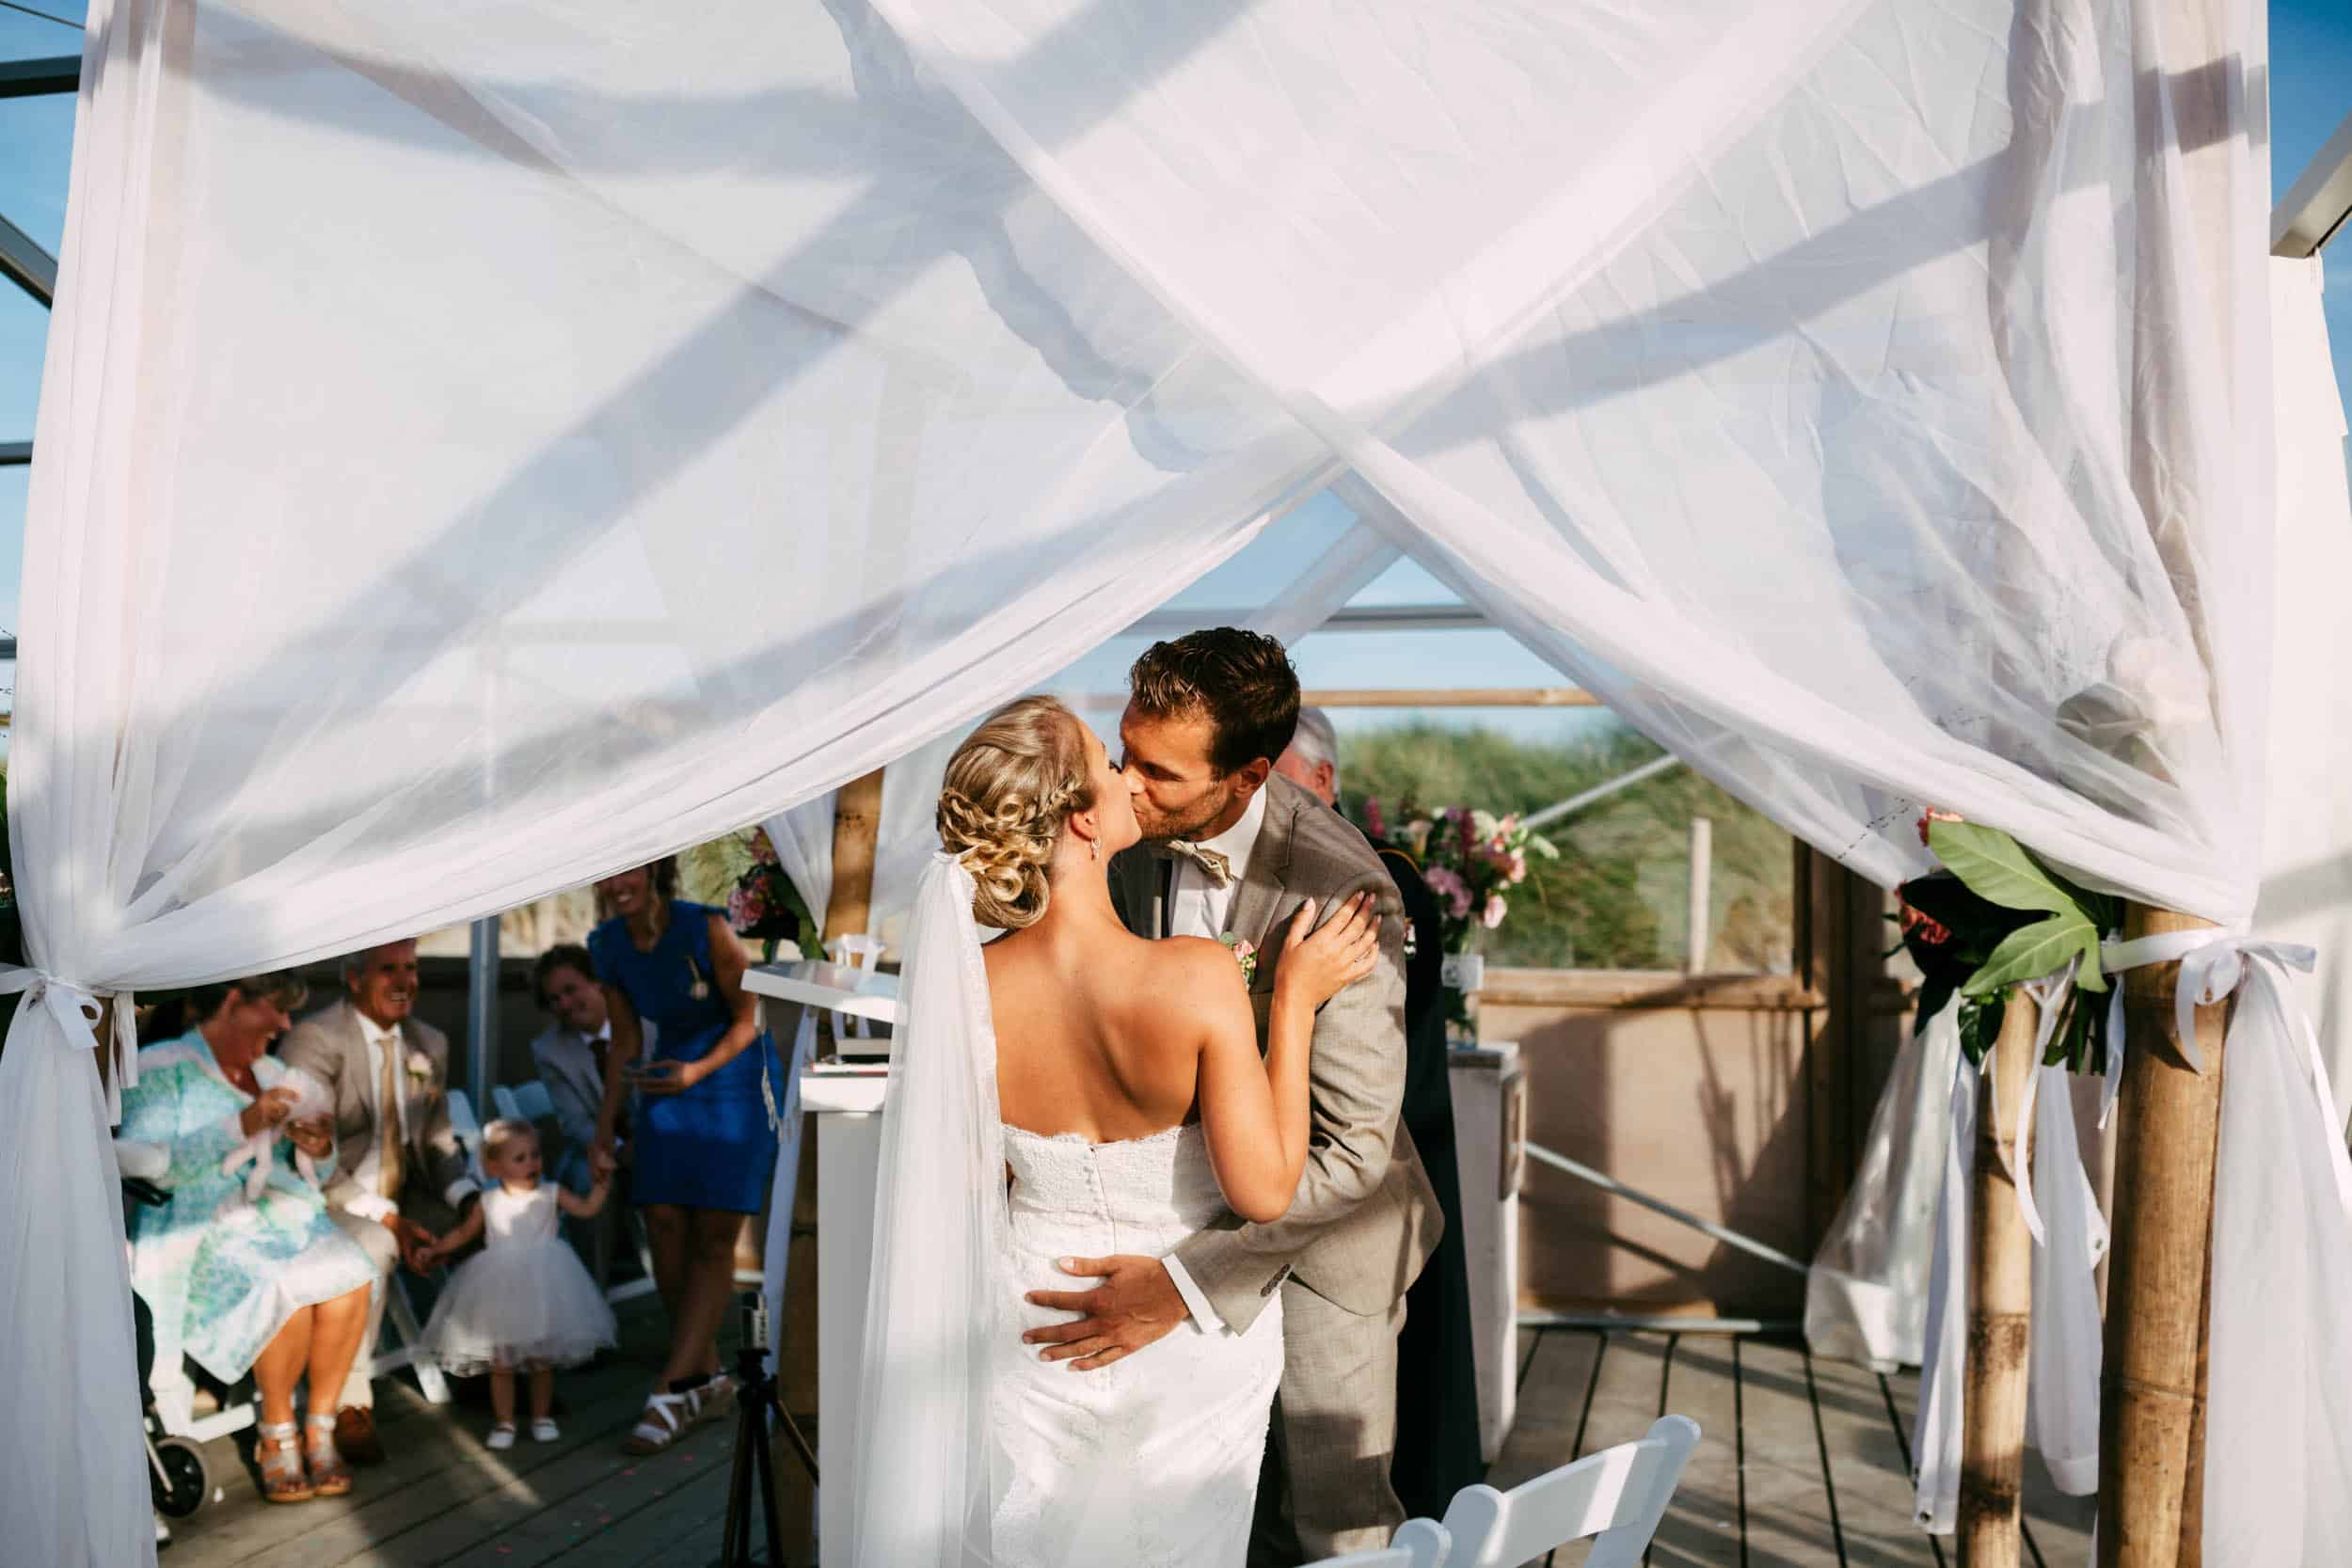 A bride and groom kiss under a tent during their wedding ceremony.